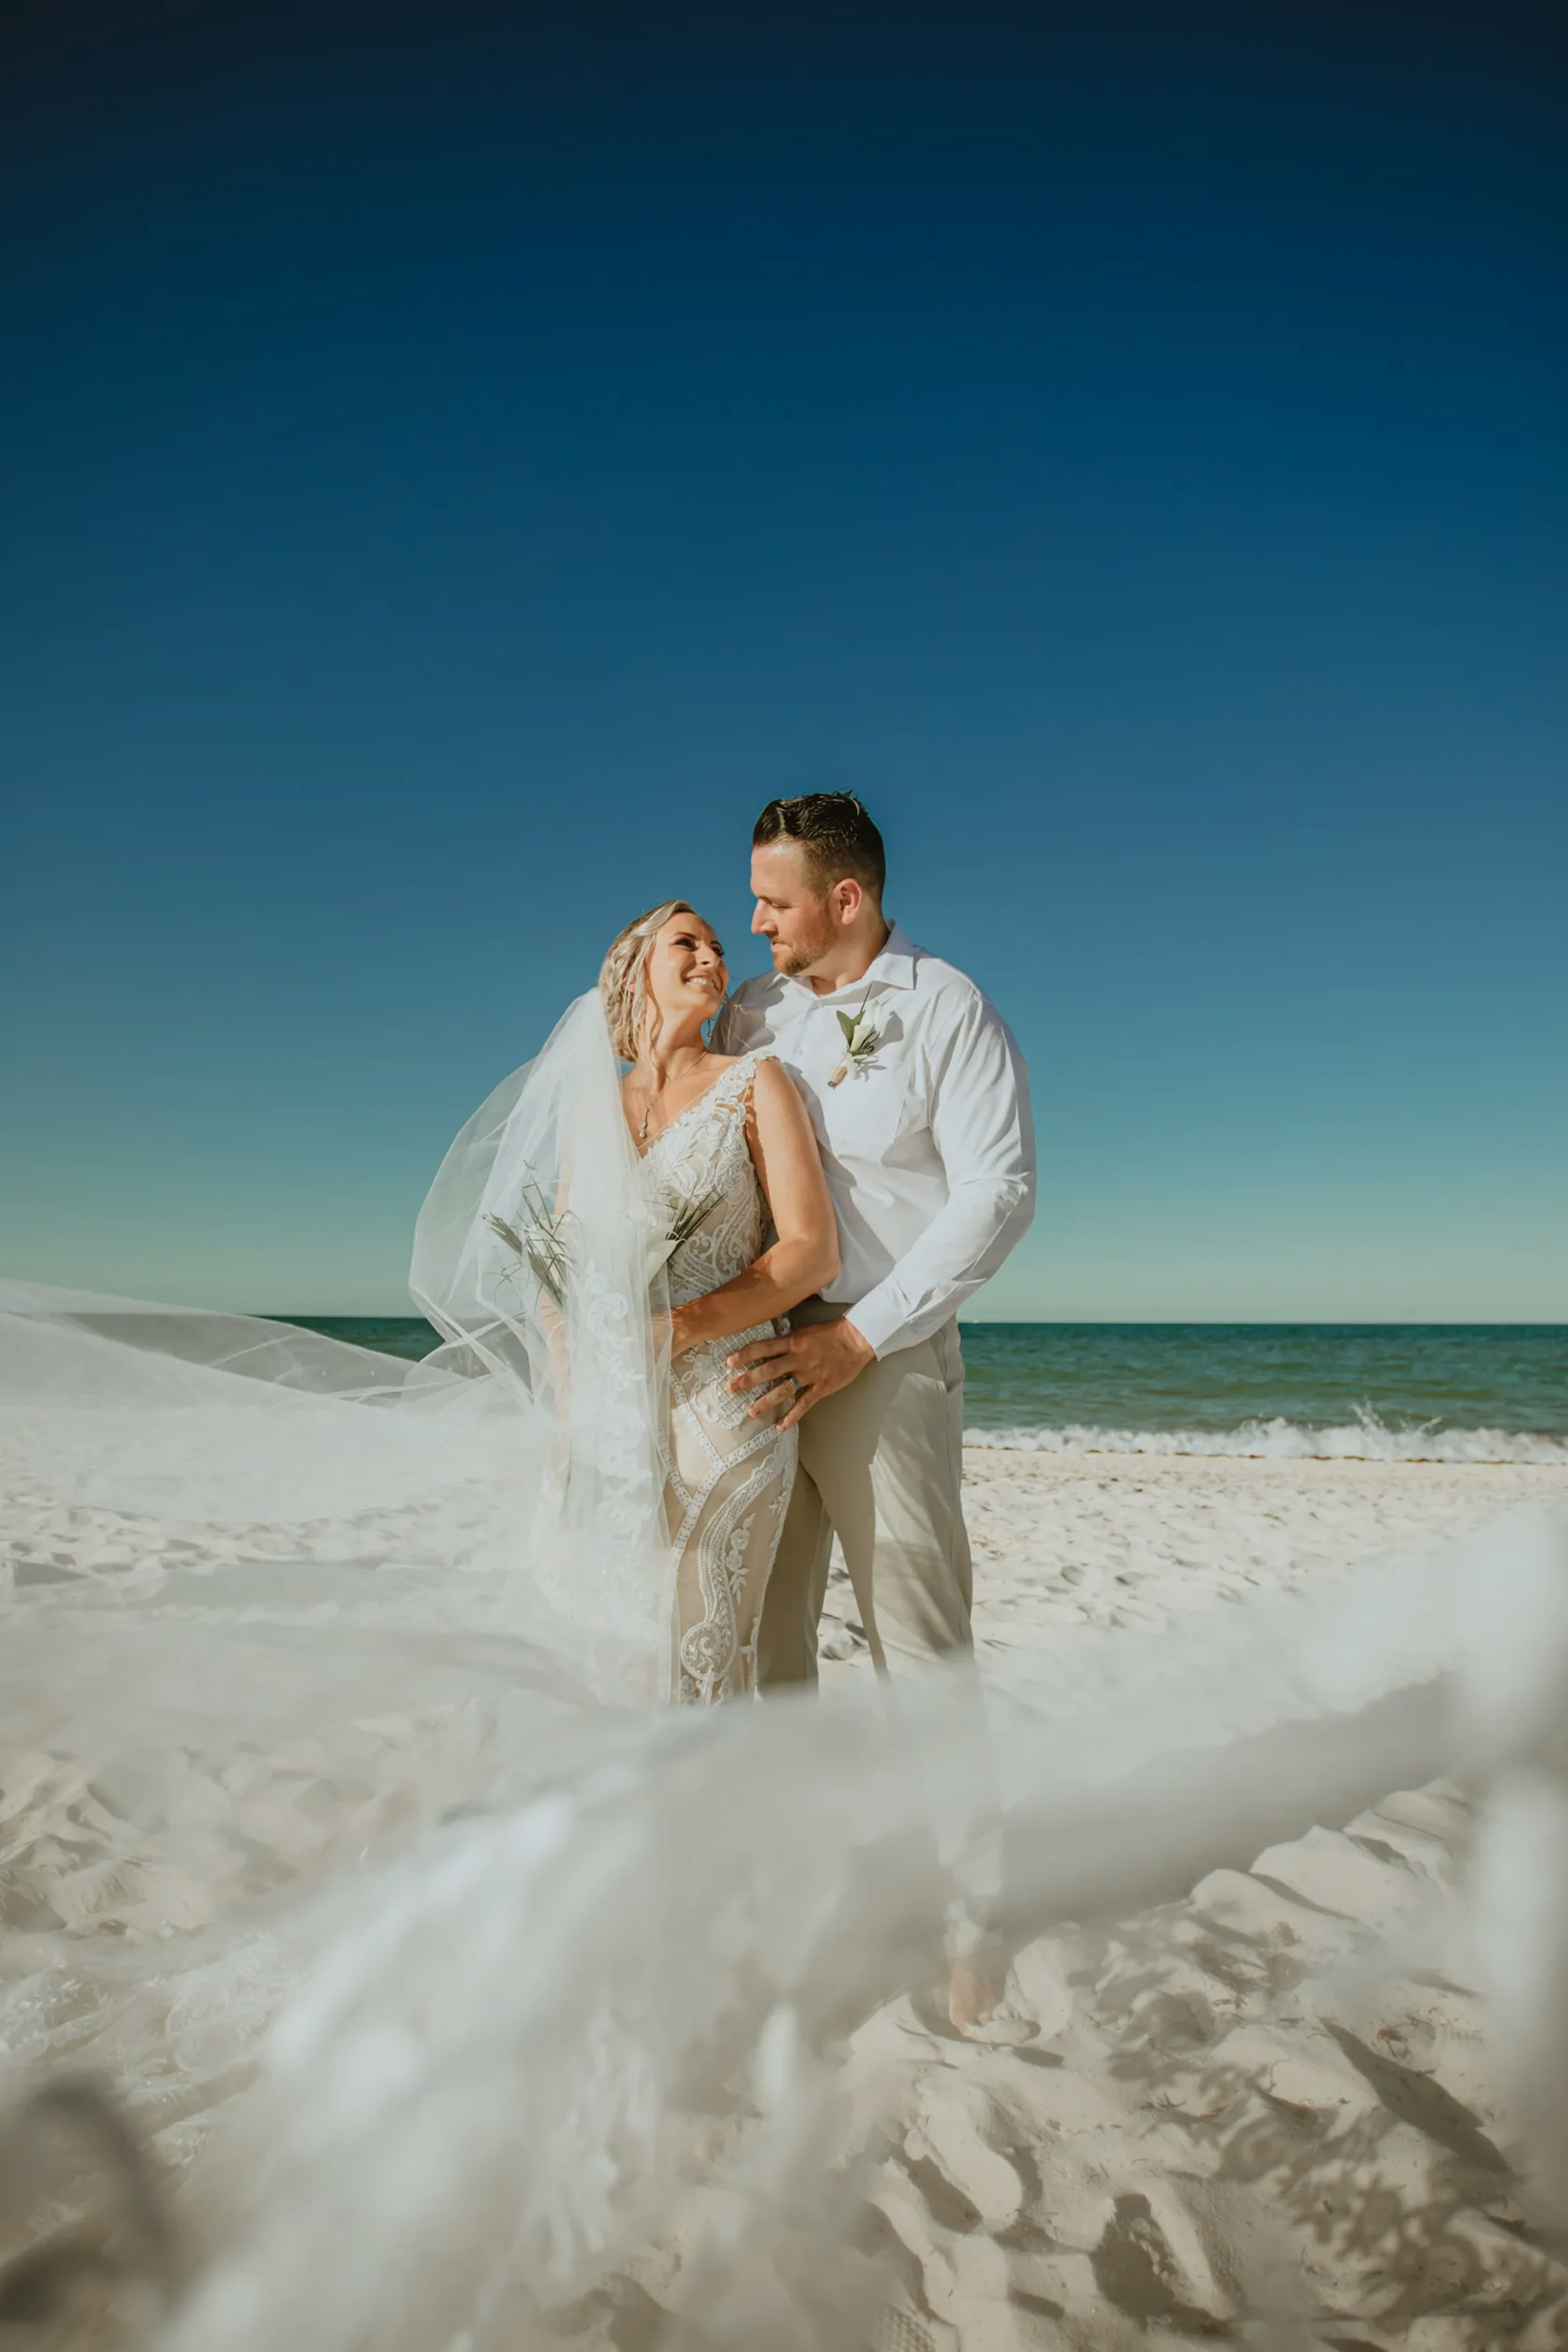 Against a clear blue sky, a bride and groom stand on a white sandy beach; the groom gazes at the bride, who smiles back, her veil caught in a gentle breeze, creating a dynamic and joyful wedding moment.